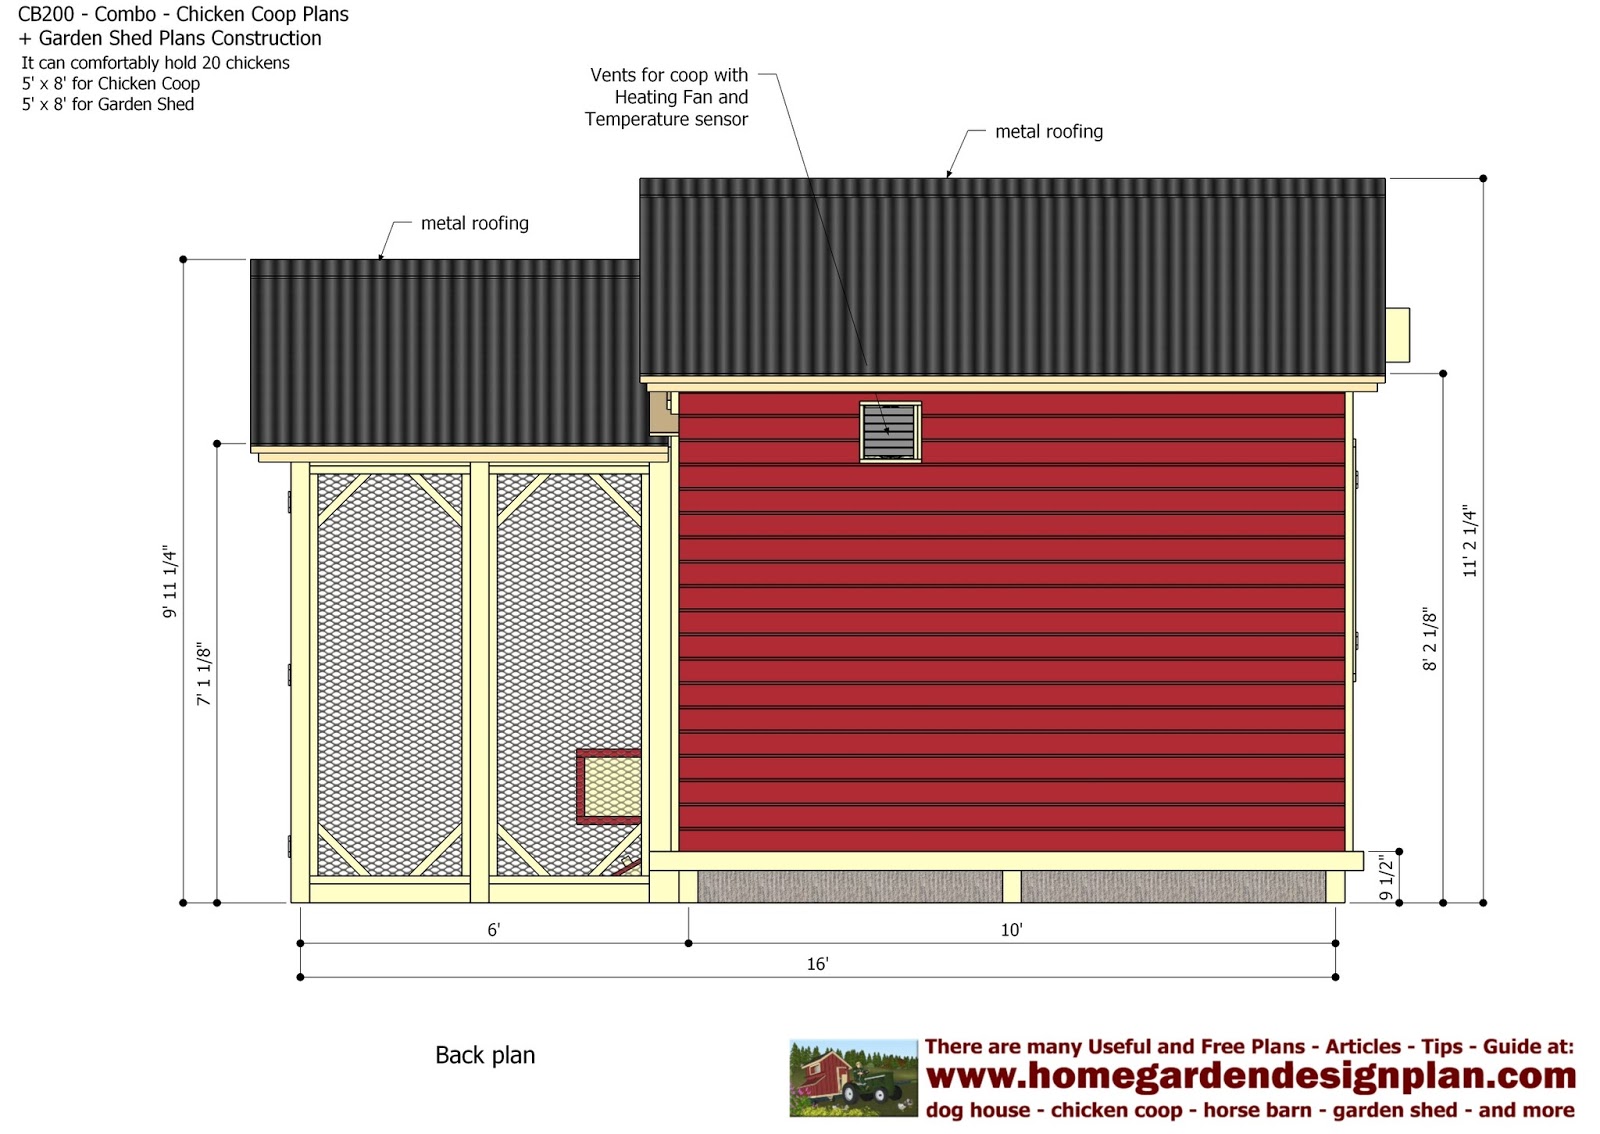 shed plans garden shed chicken co op combo storage shed plans garden 